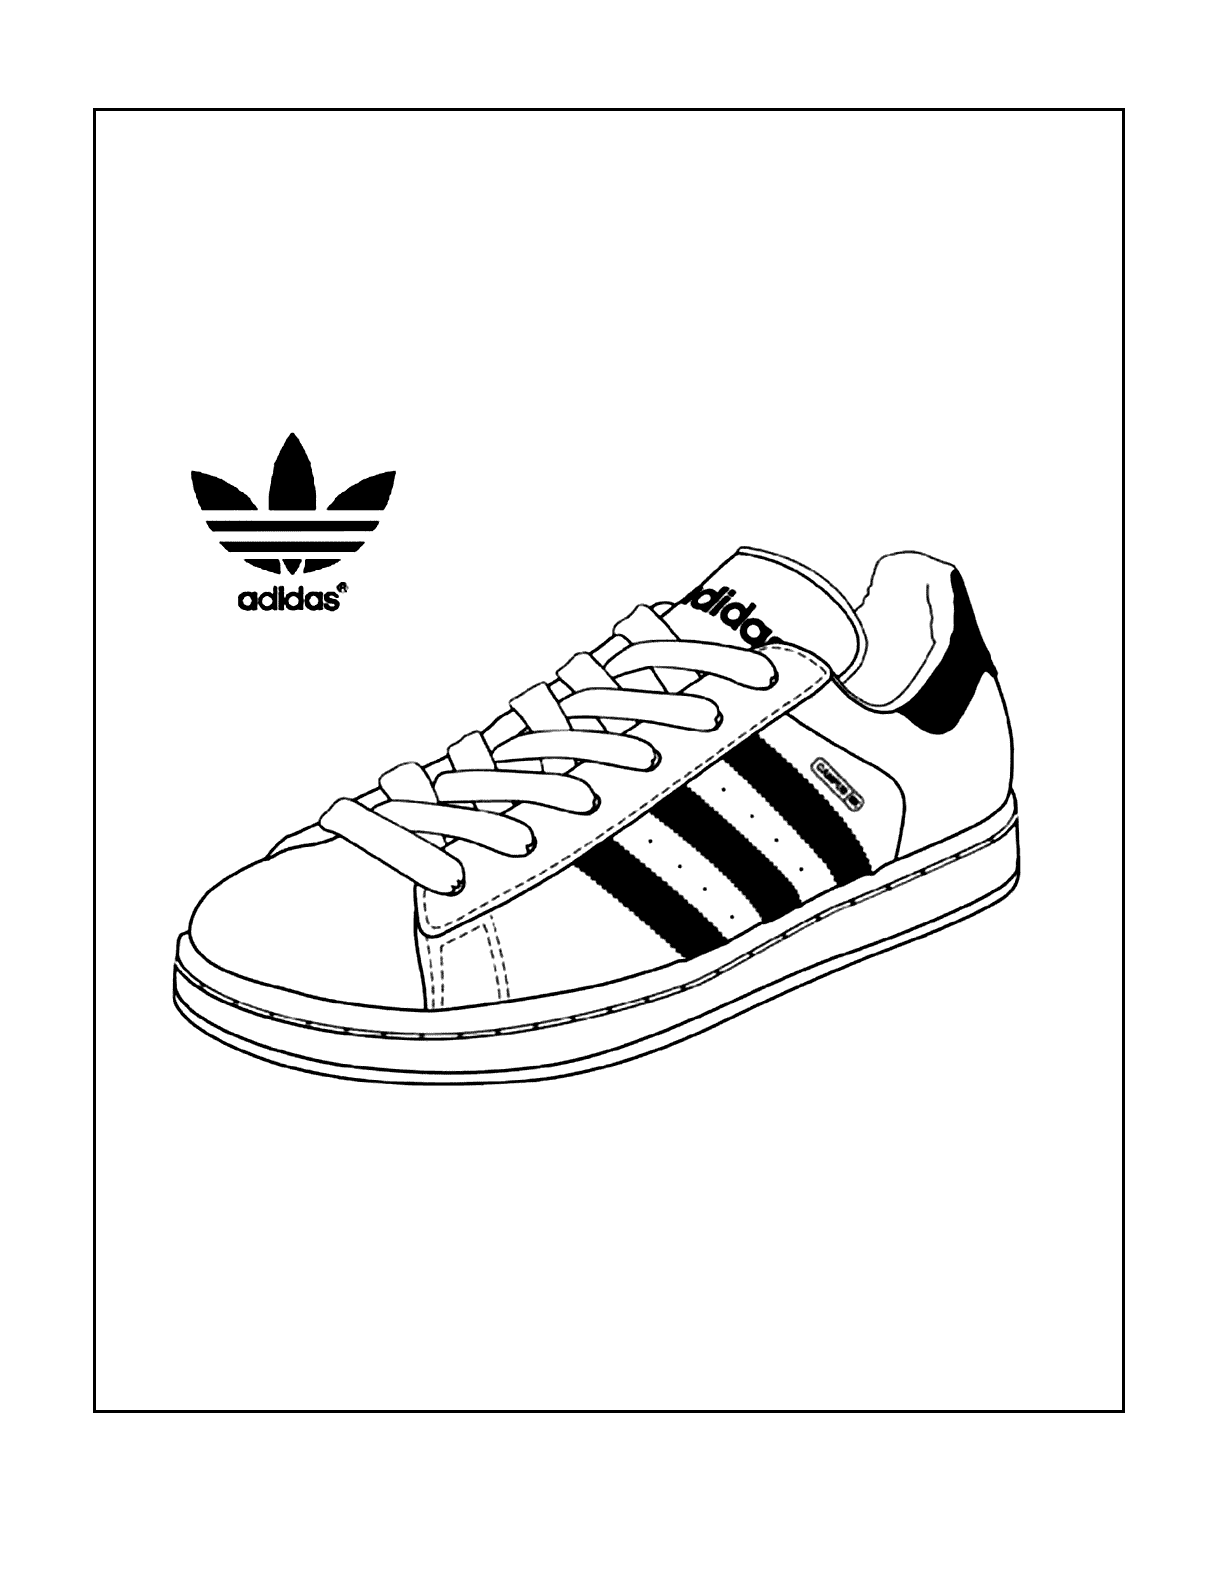 Adidas Shell Toe Shoe Coloring Page